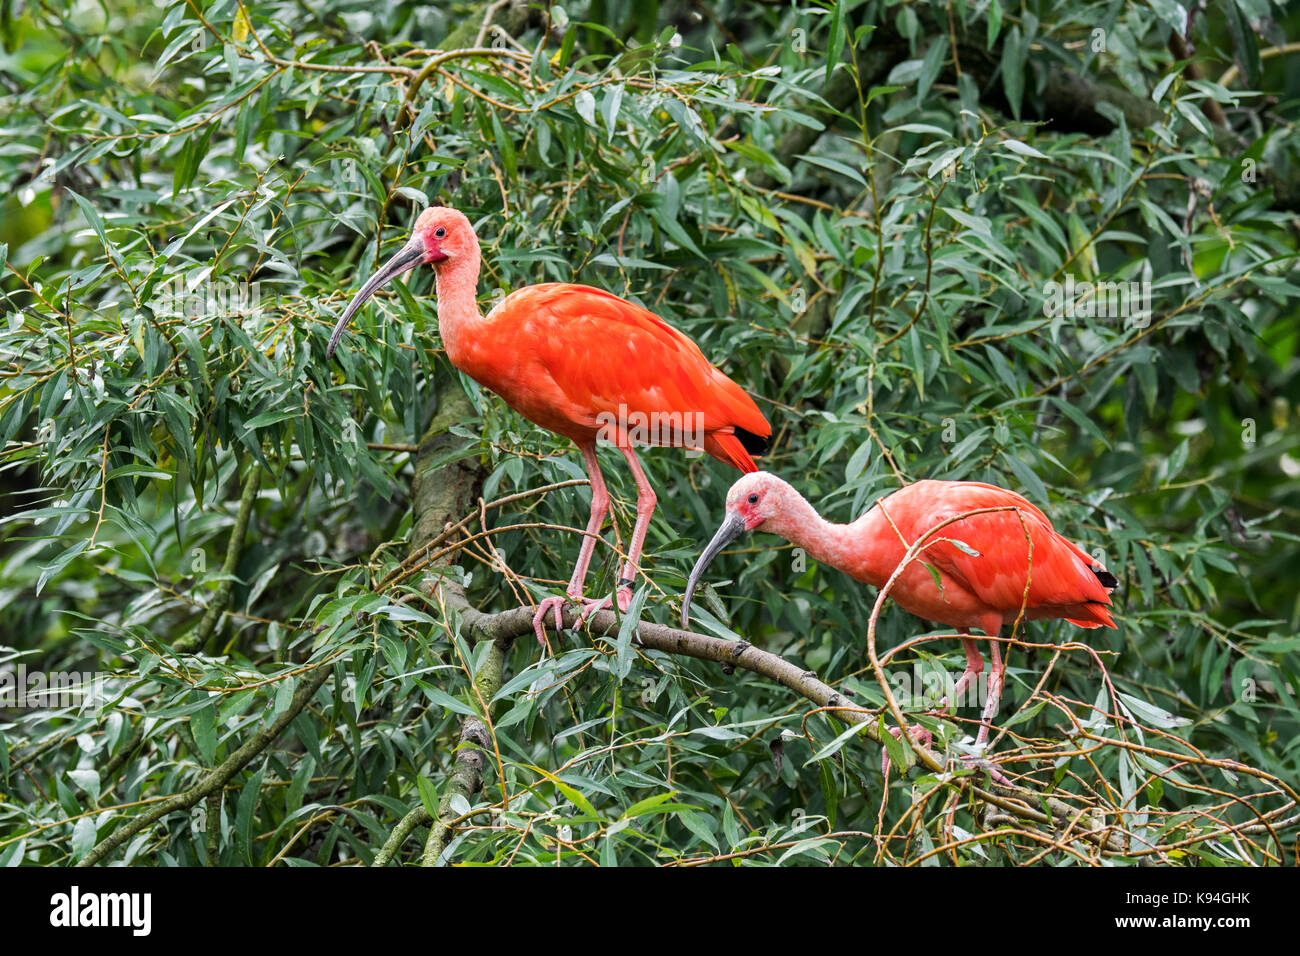 Two scarlet ibises (Eudocimus ruber) perched in tree, native to tropical South America and islands of the Caribbean Stock Photo